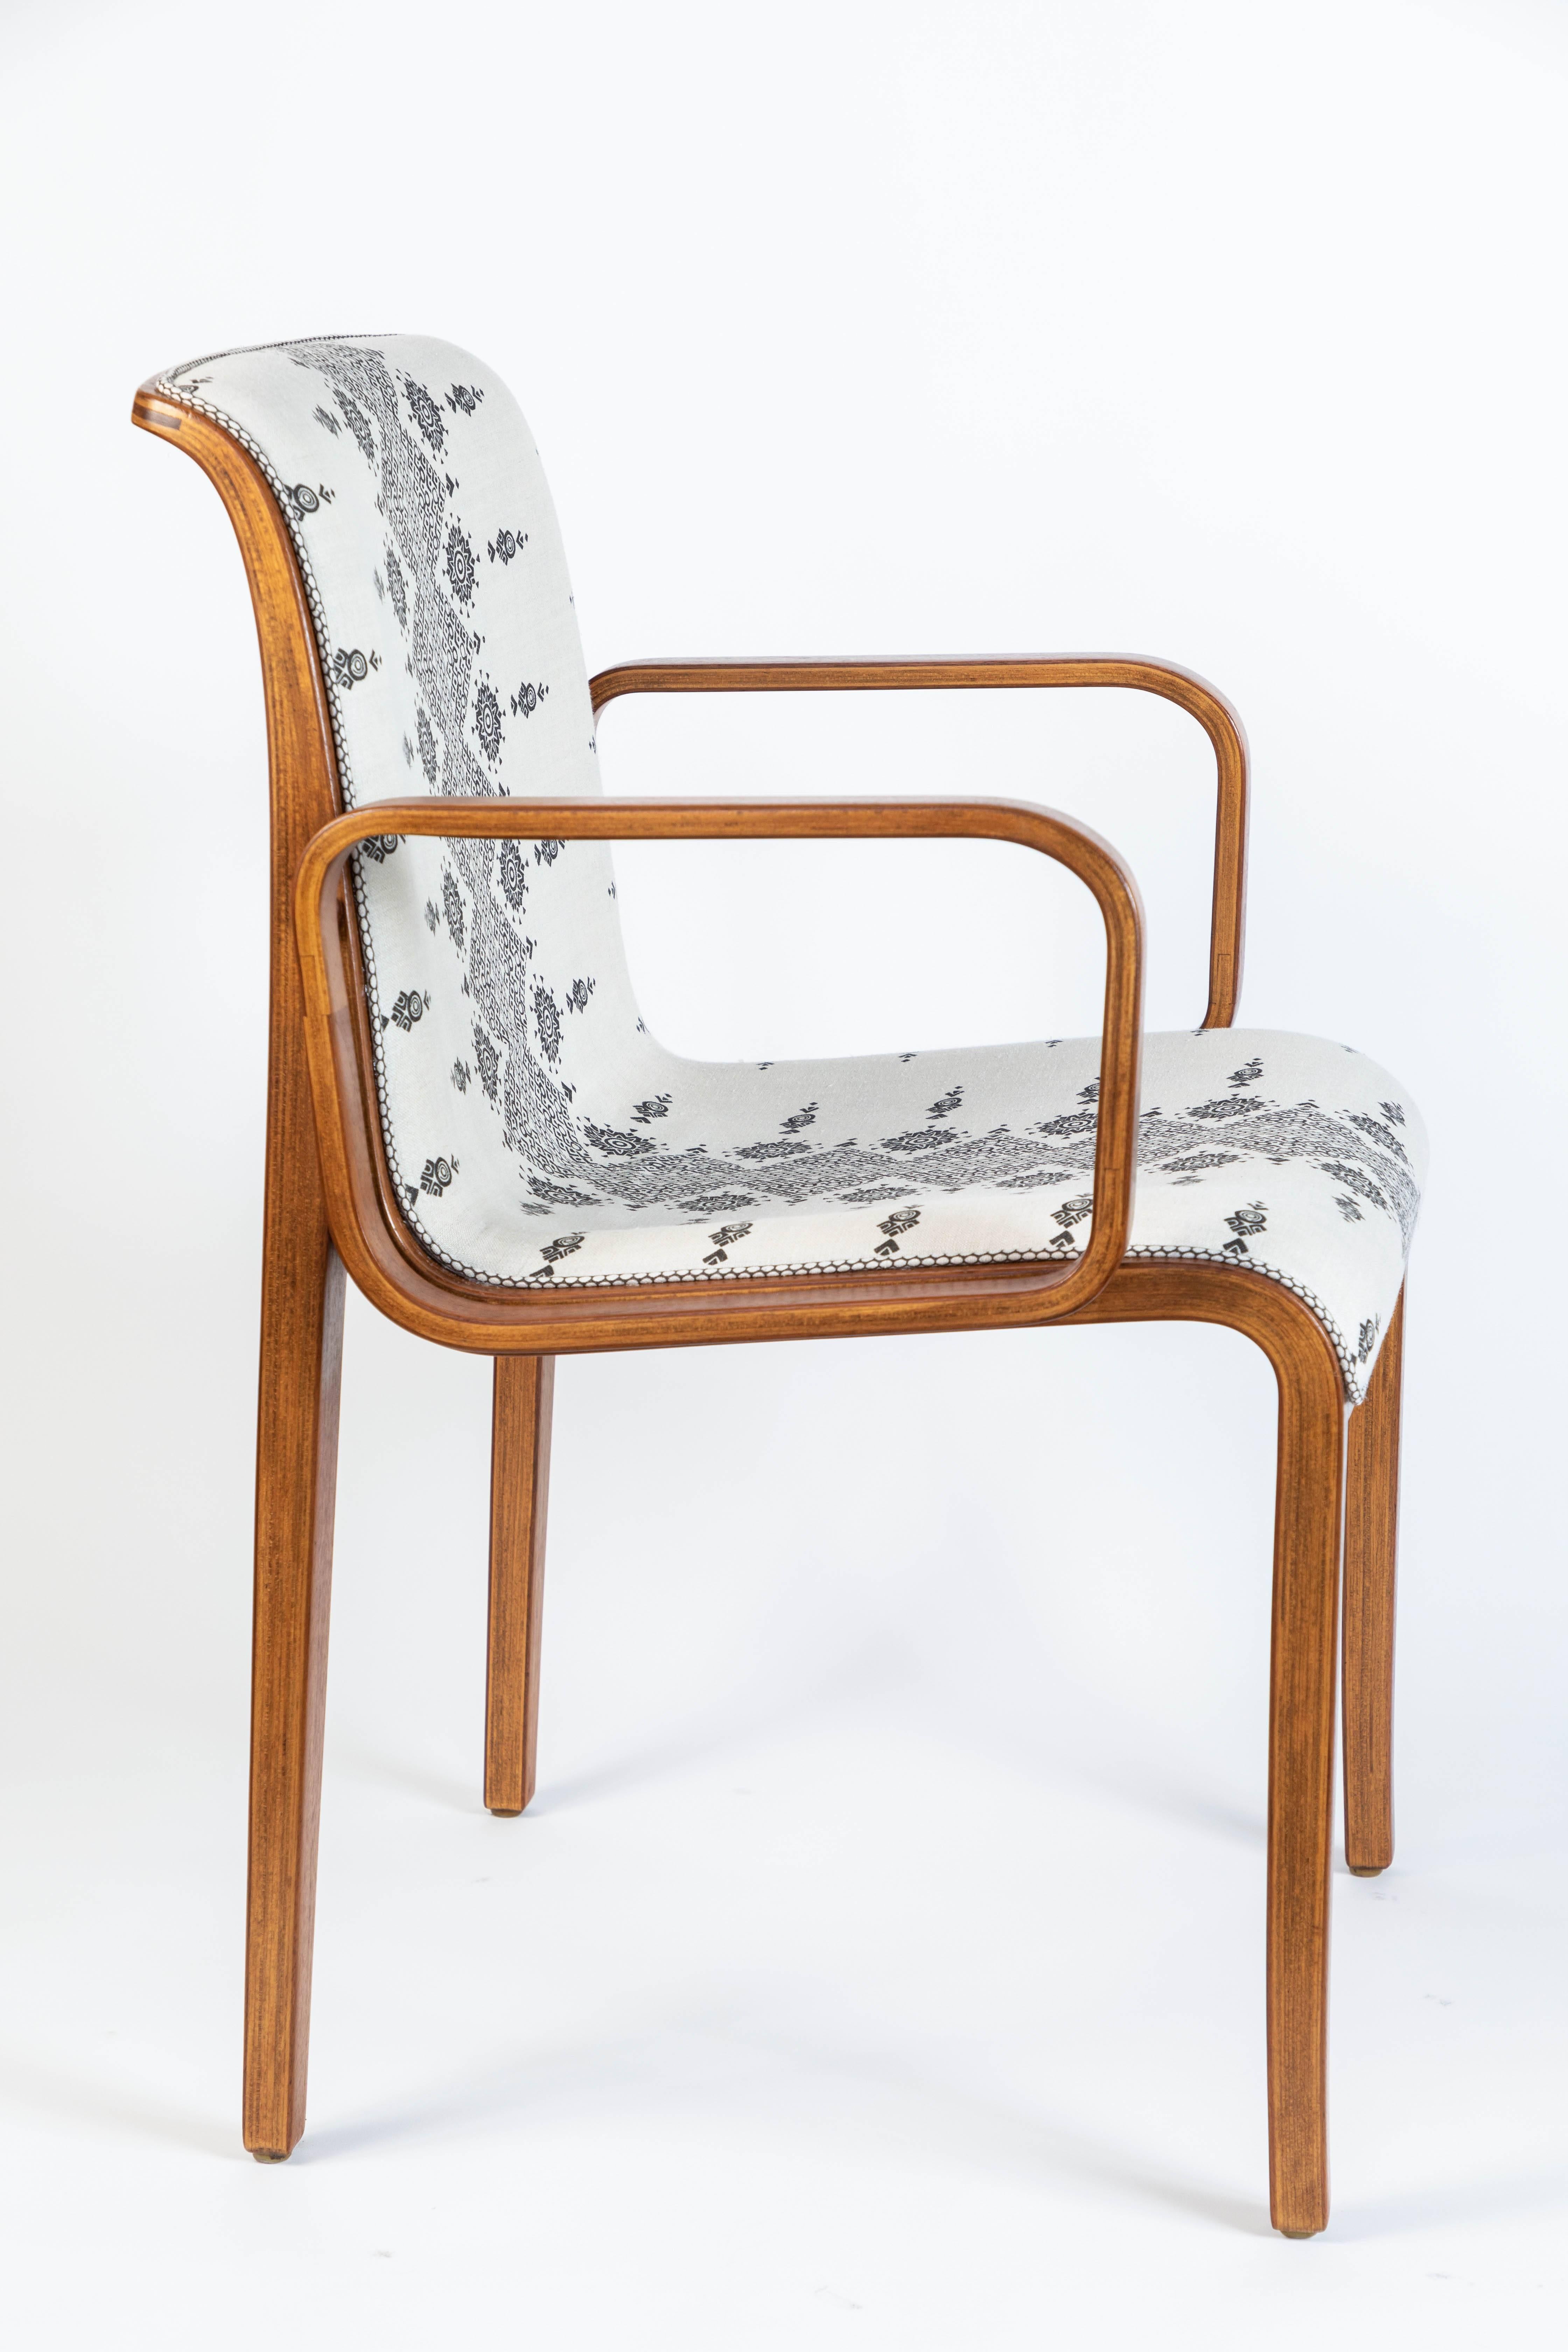 20th Century Midcentury Bentwood Armchair Newly Upholstered in Peter Dunham Linen